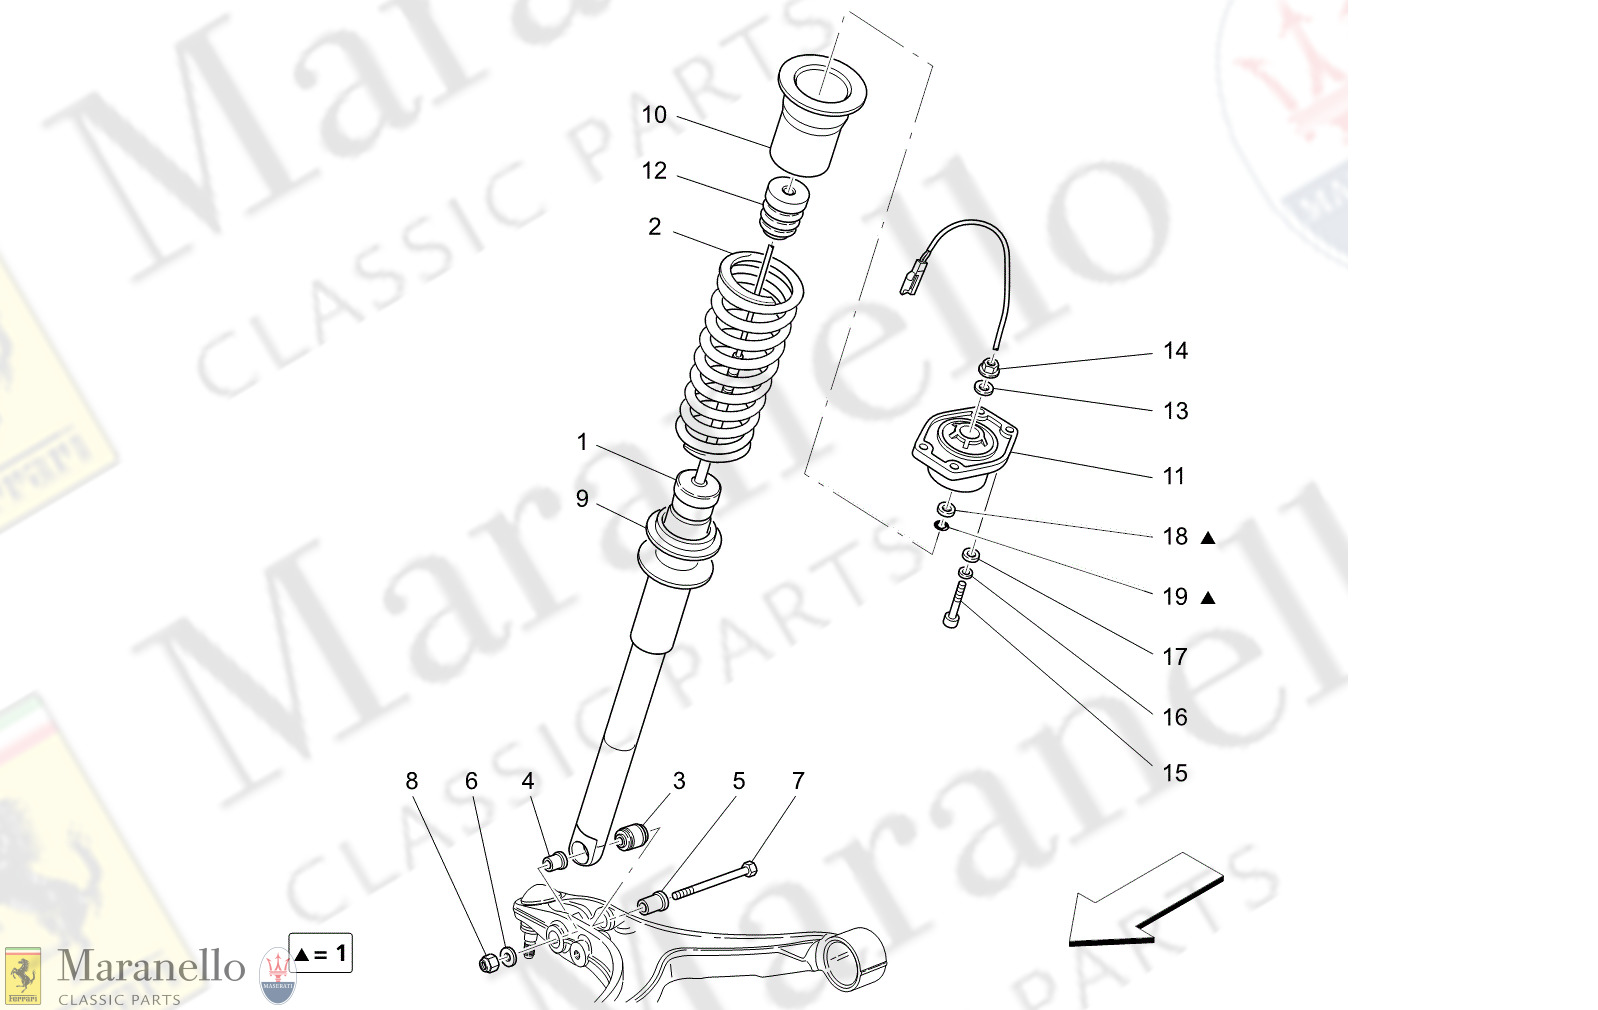 06.11 - 13 - 0611 - 13 Front Shock Absorber Devices